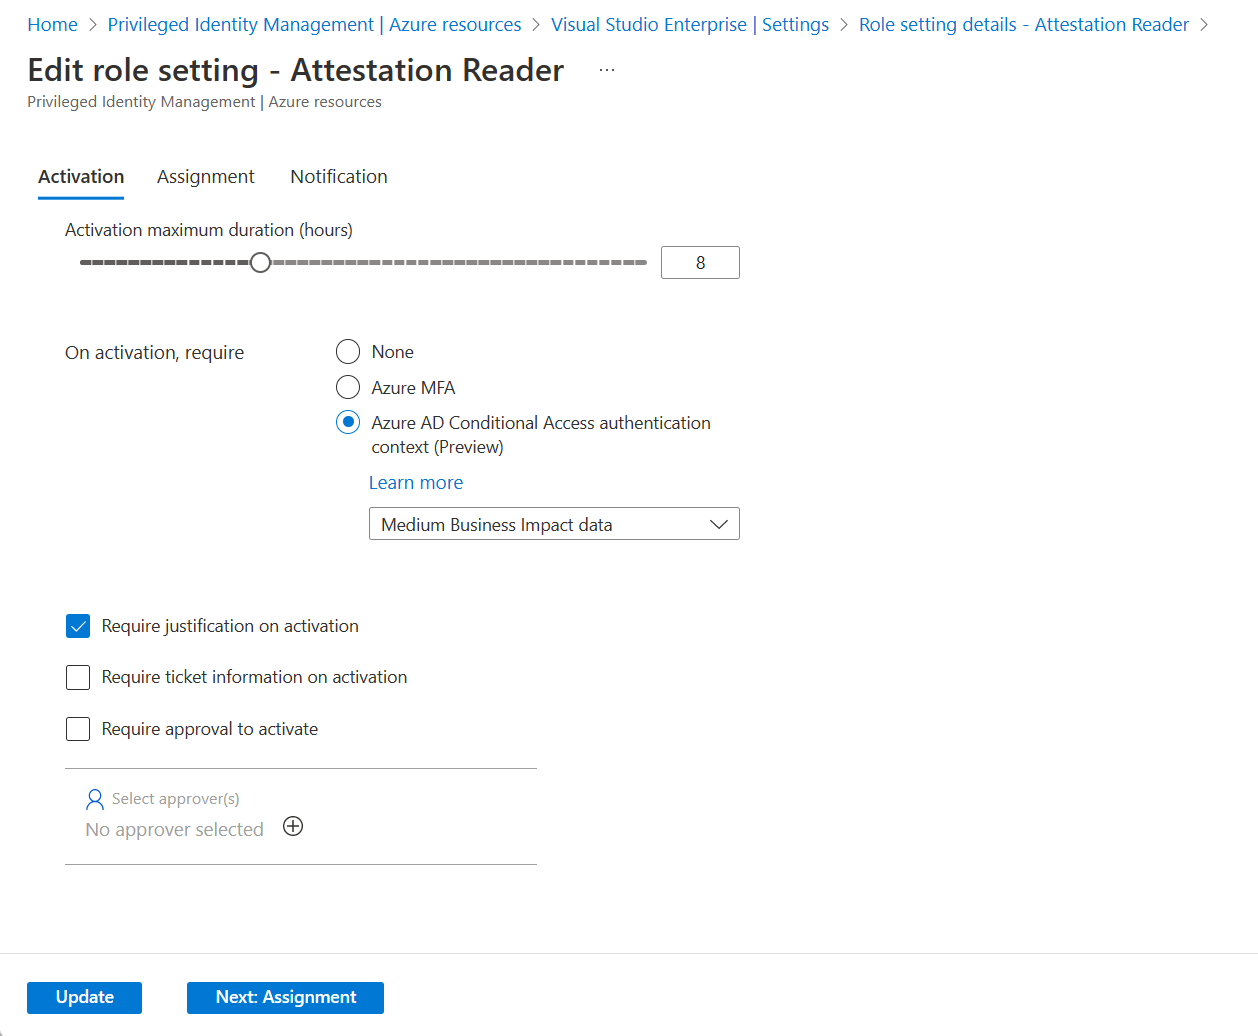 Role setting details page listing several assignment and activation settings